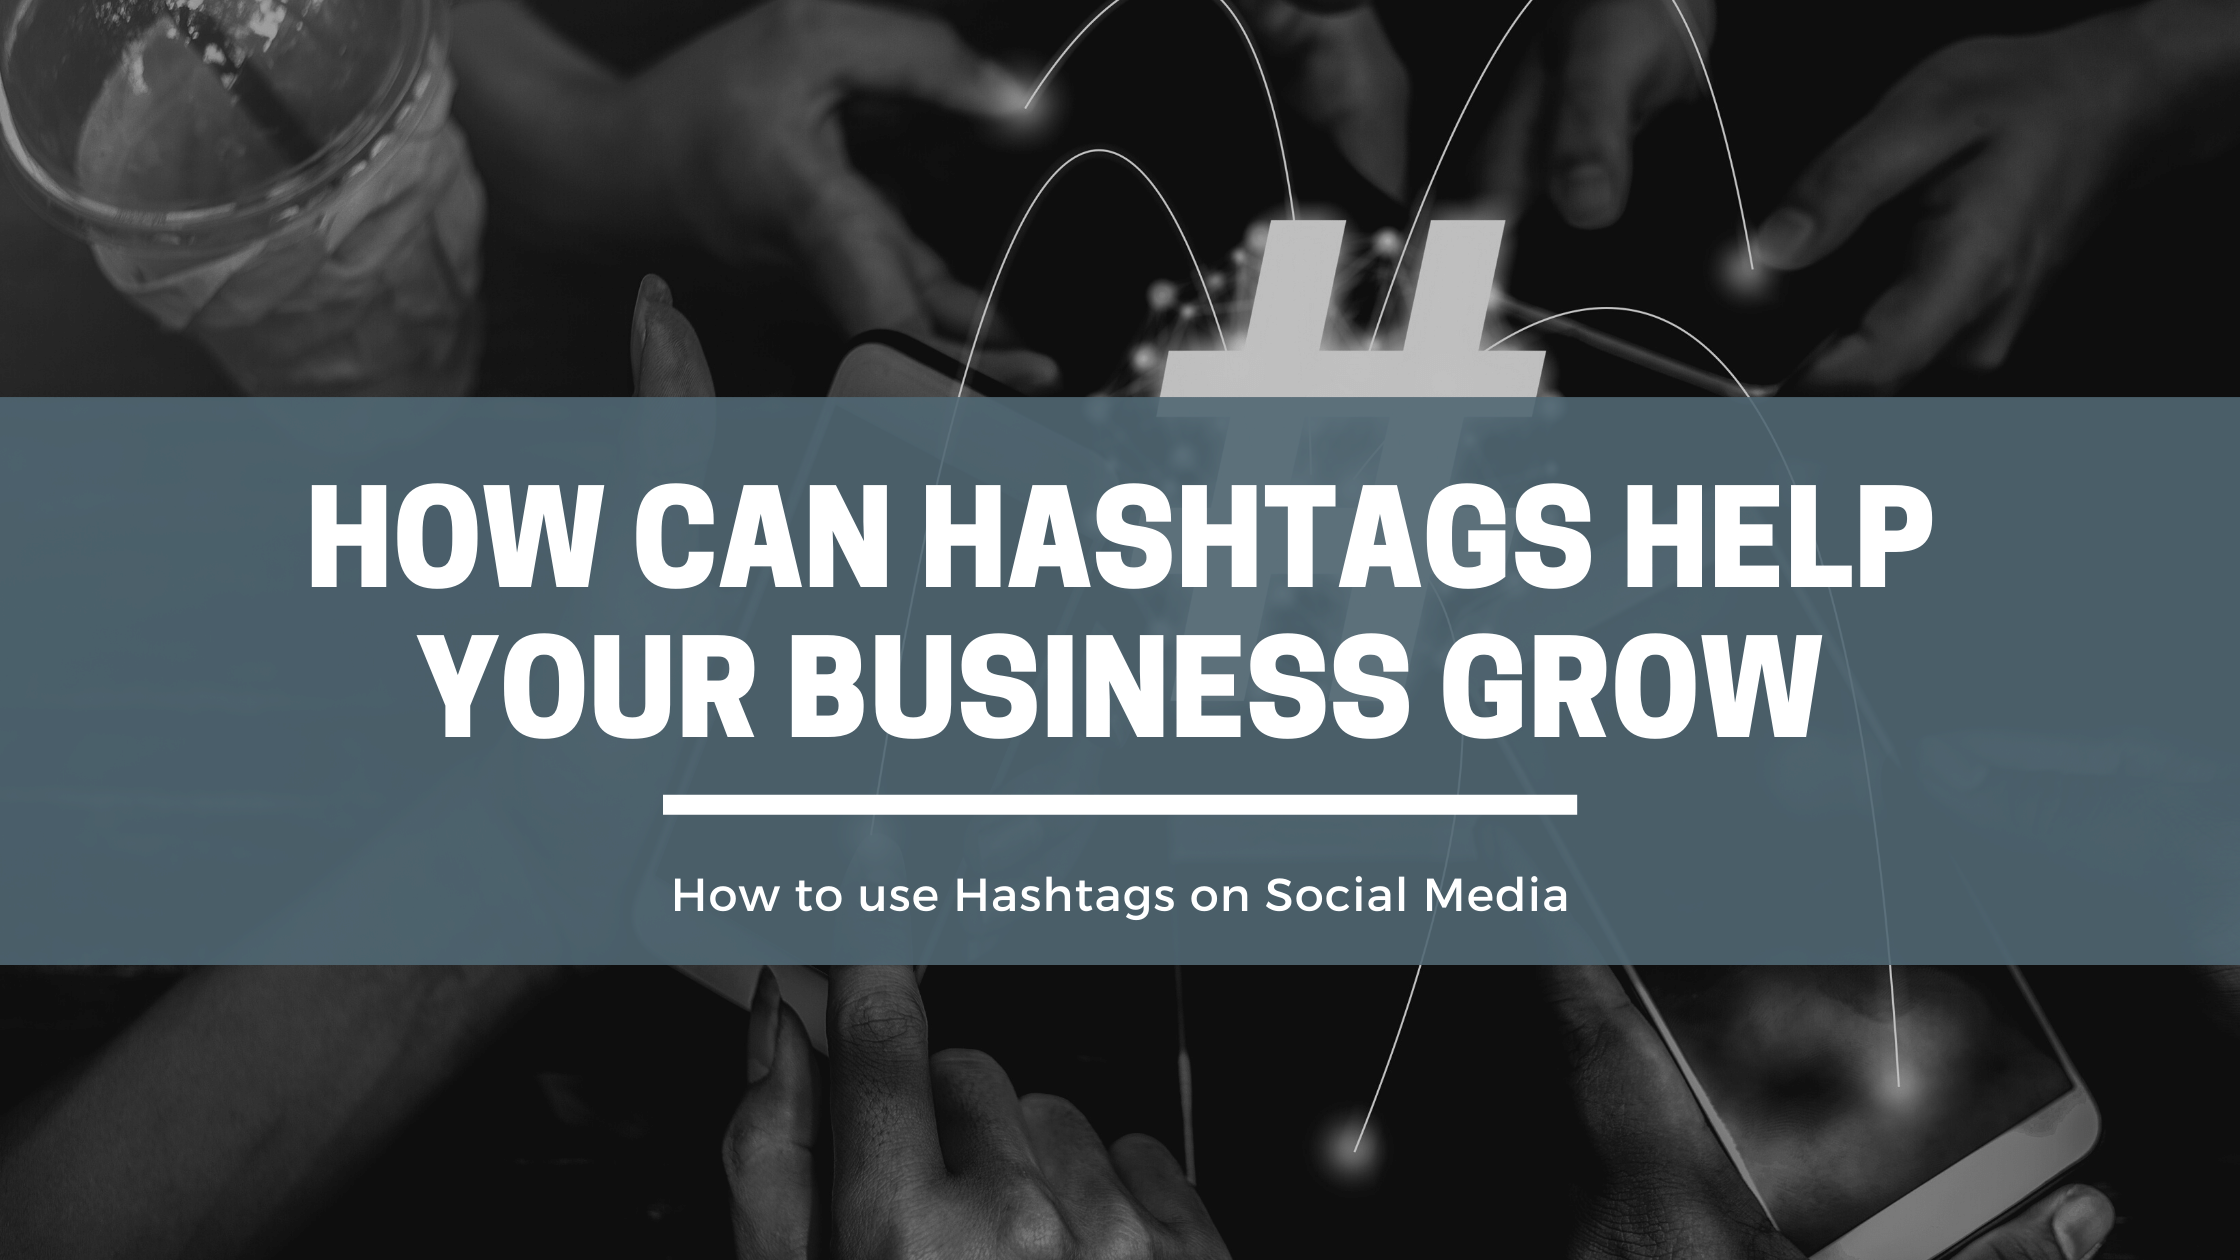 HOW CAN HASHTAGS HELP YOUR BUSINESS GROW